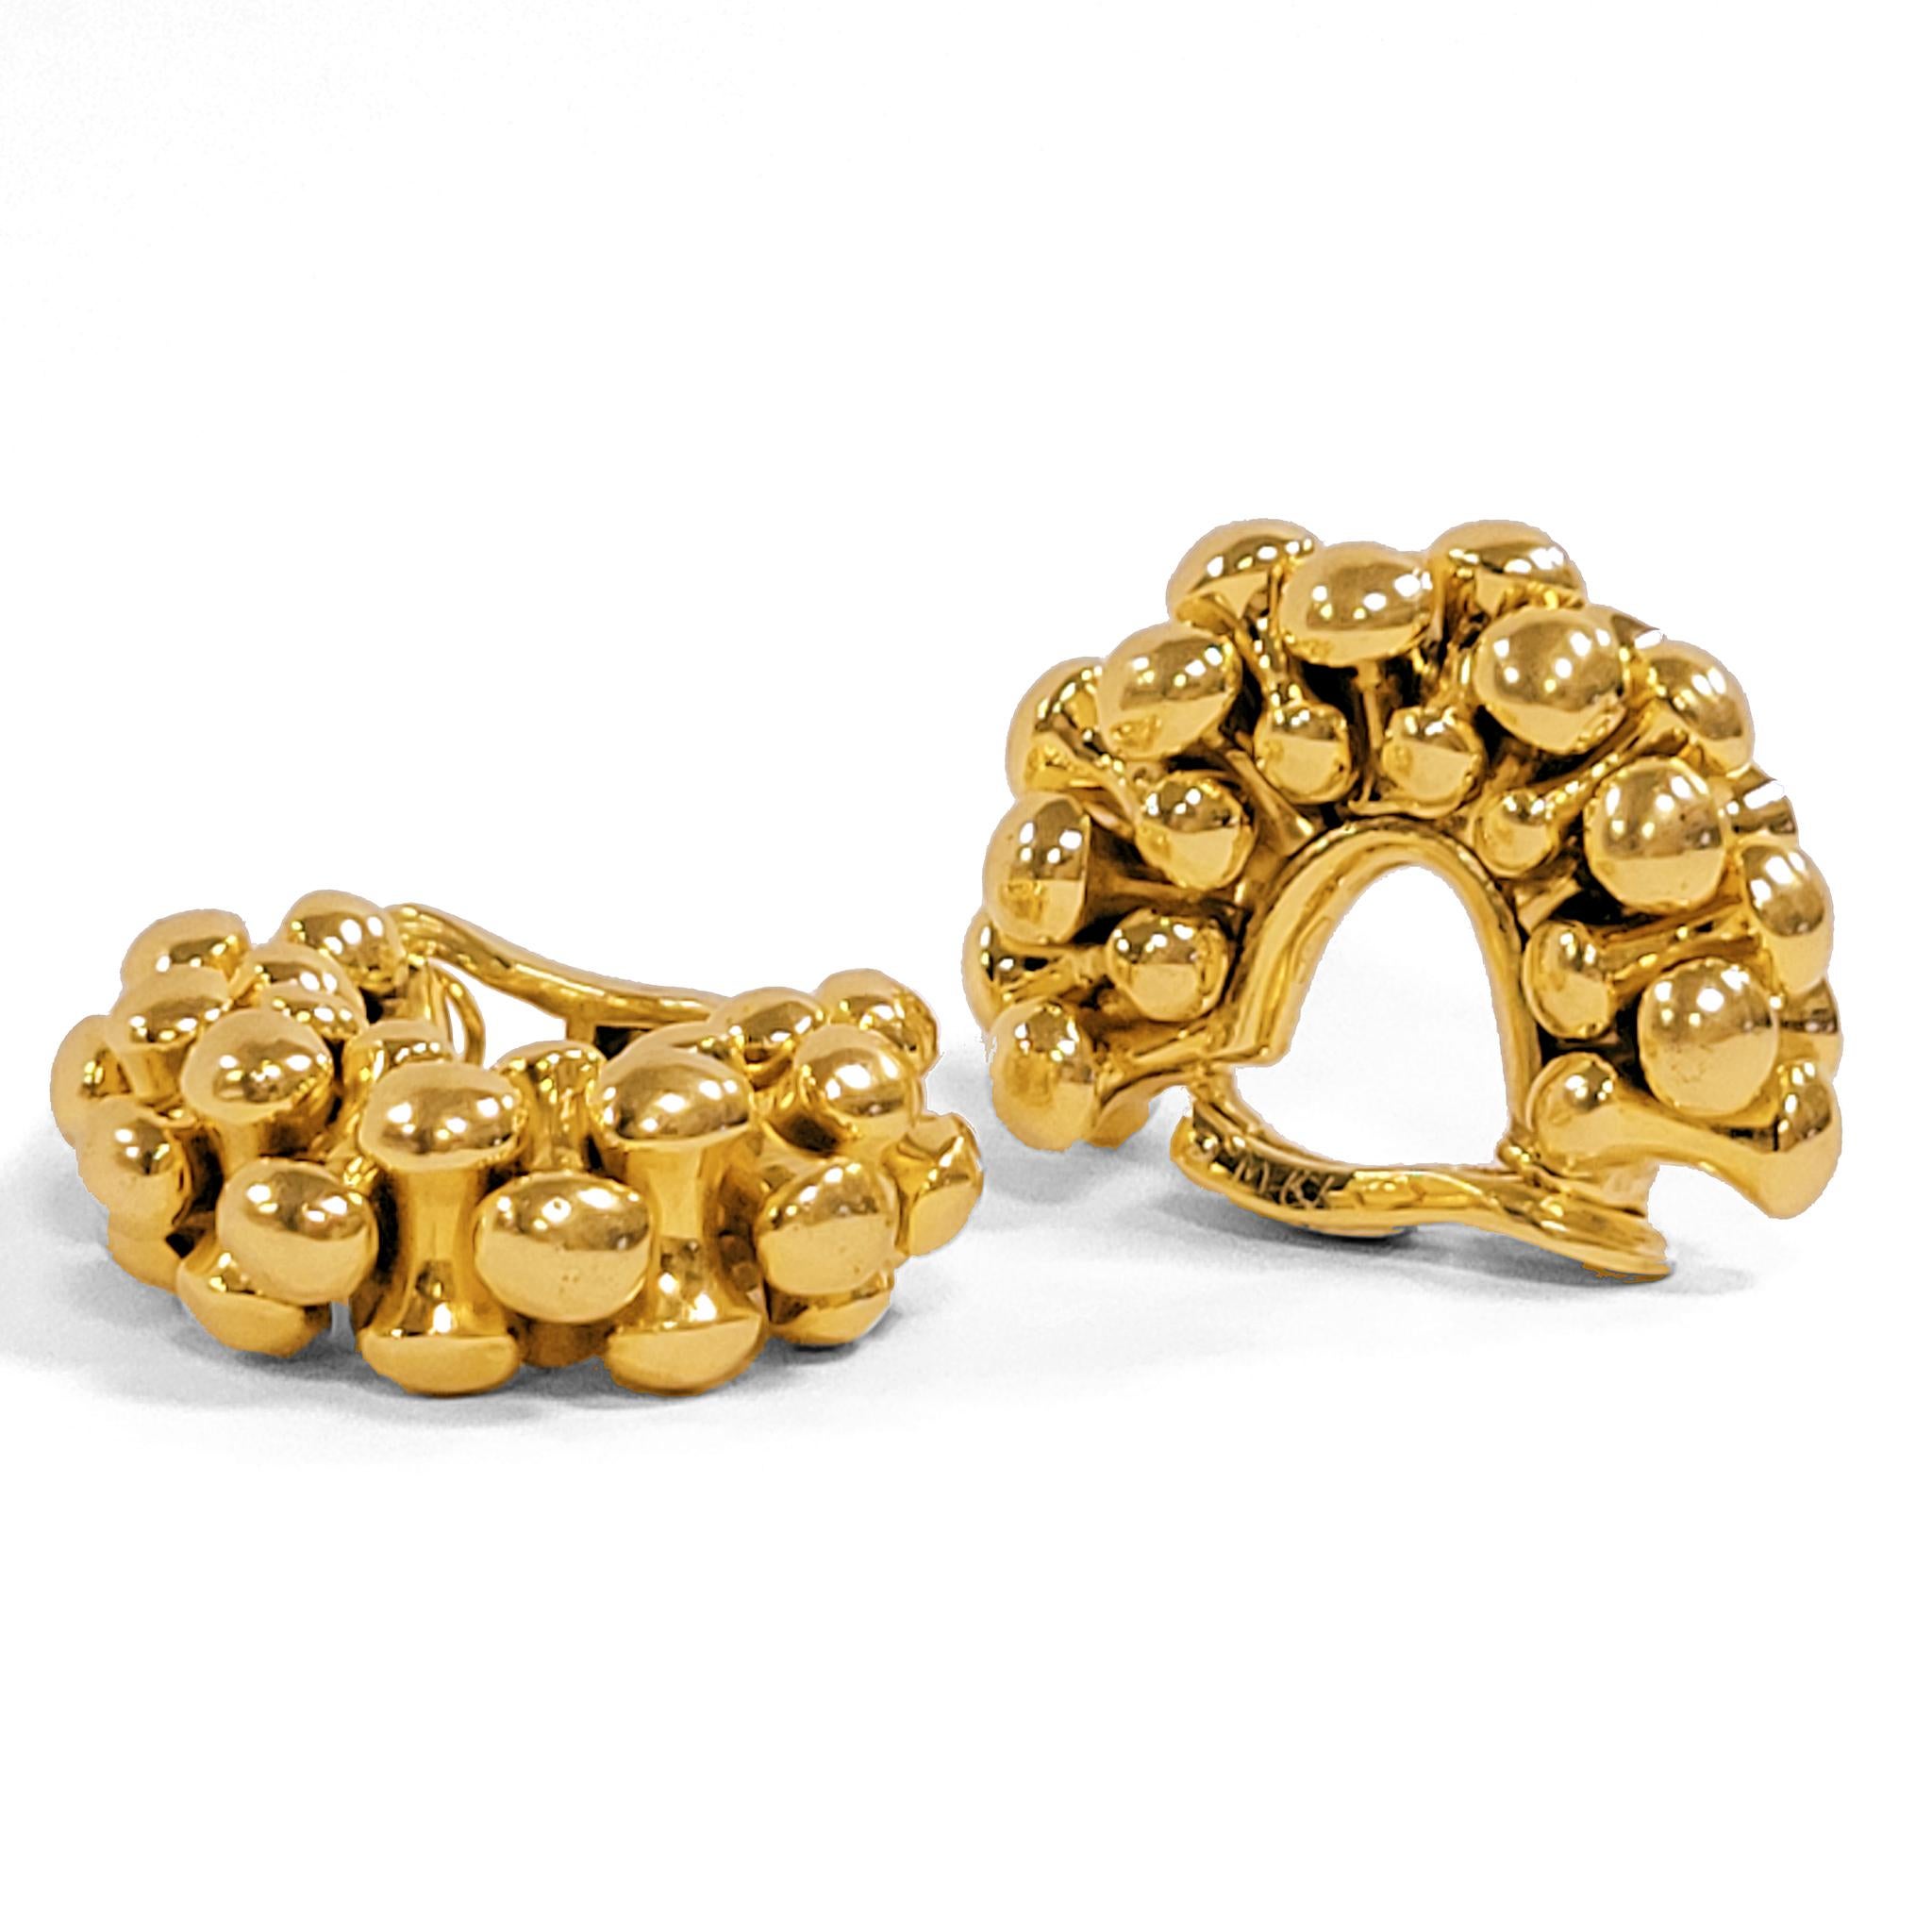 Created by Bulgari Rome, these late 20th century half hoops clipback earrings are composed of gold. Each half hoop is designed as alternating rows of interlocking ovoids oriented frontally and sideways. These gleaming gold hoops, with their unusual